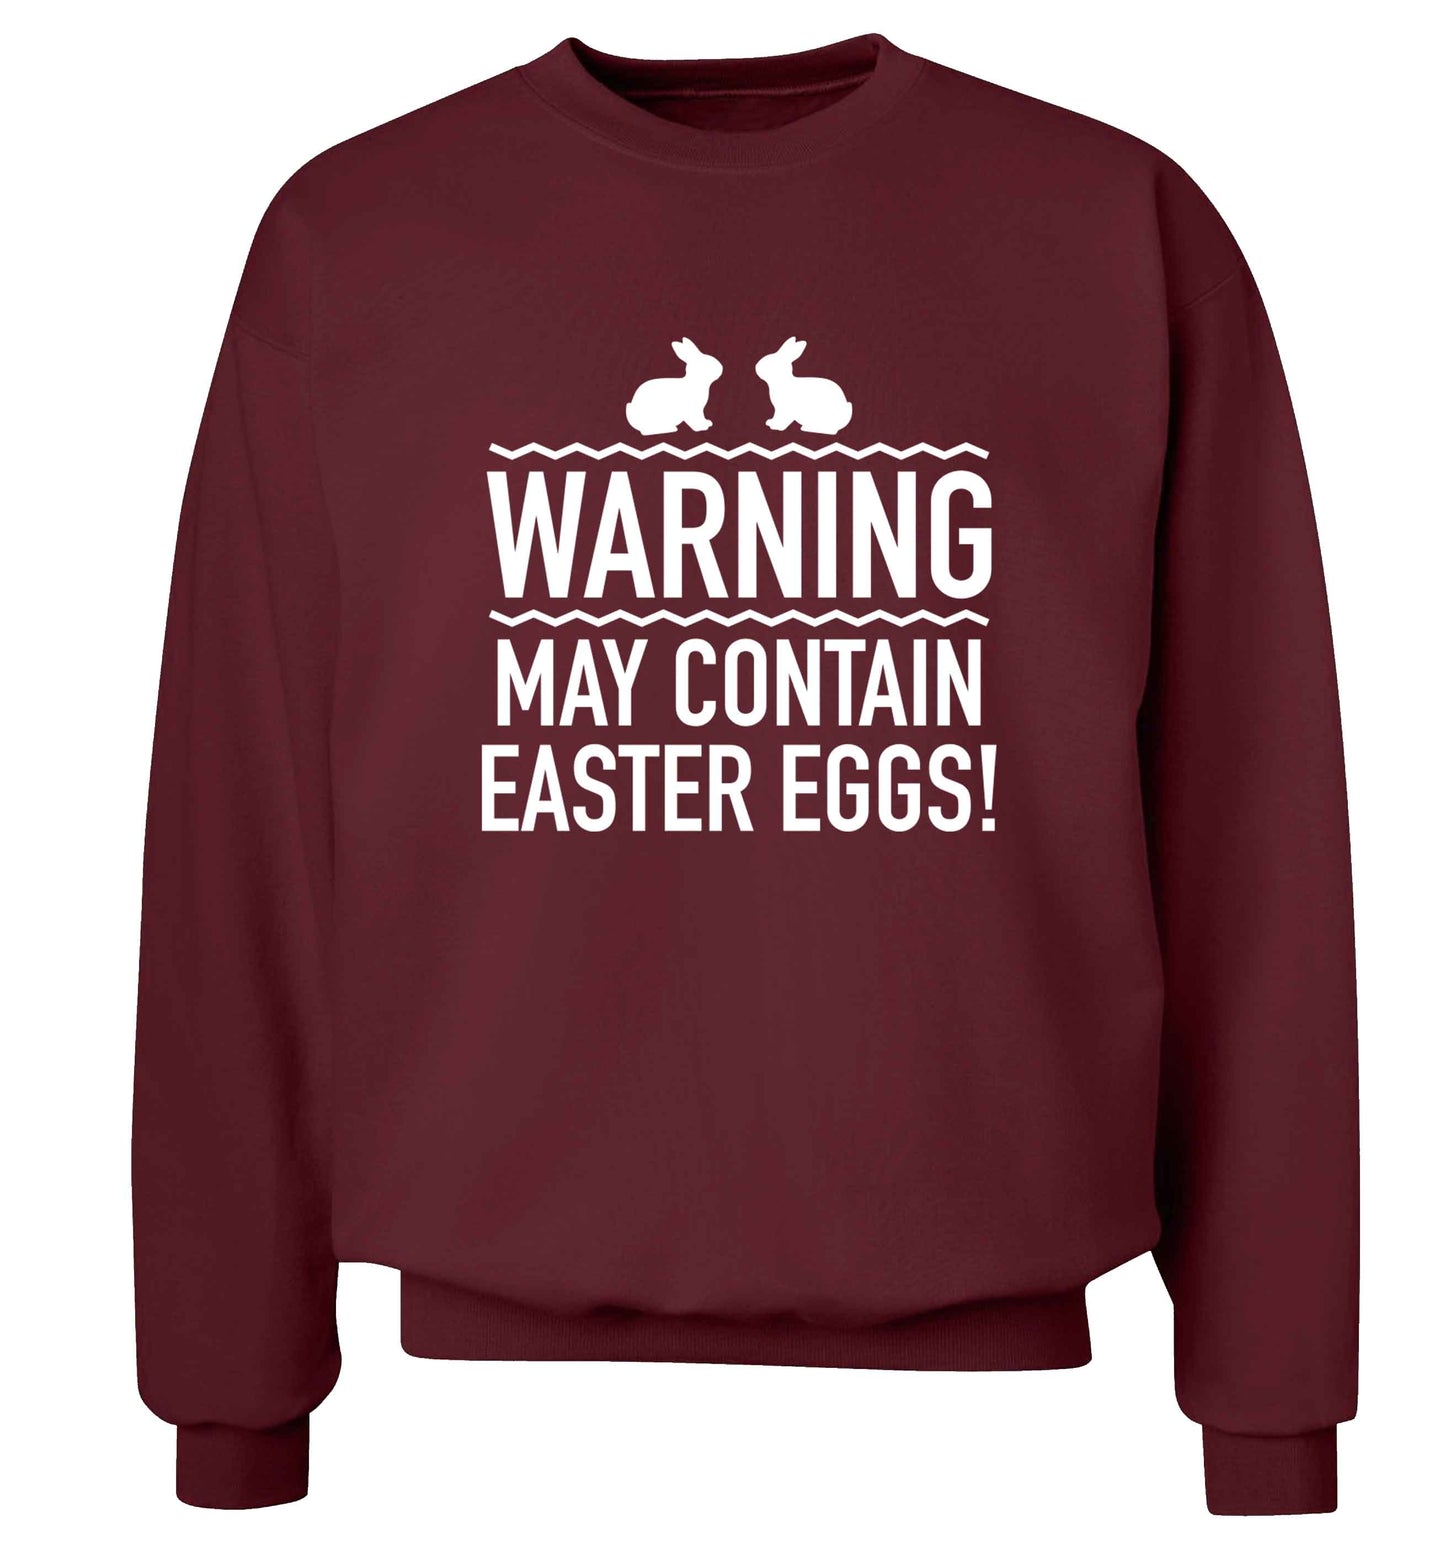 Warning may contain Easter eggs adult's unisex maroon sweater 2XL